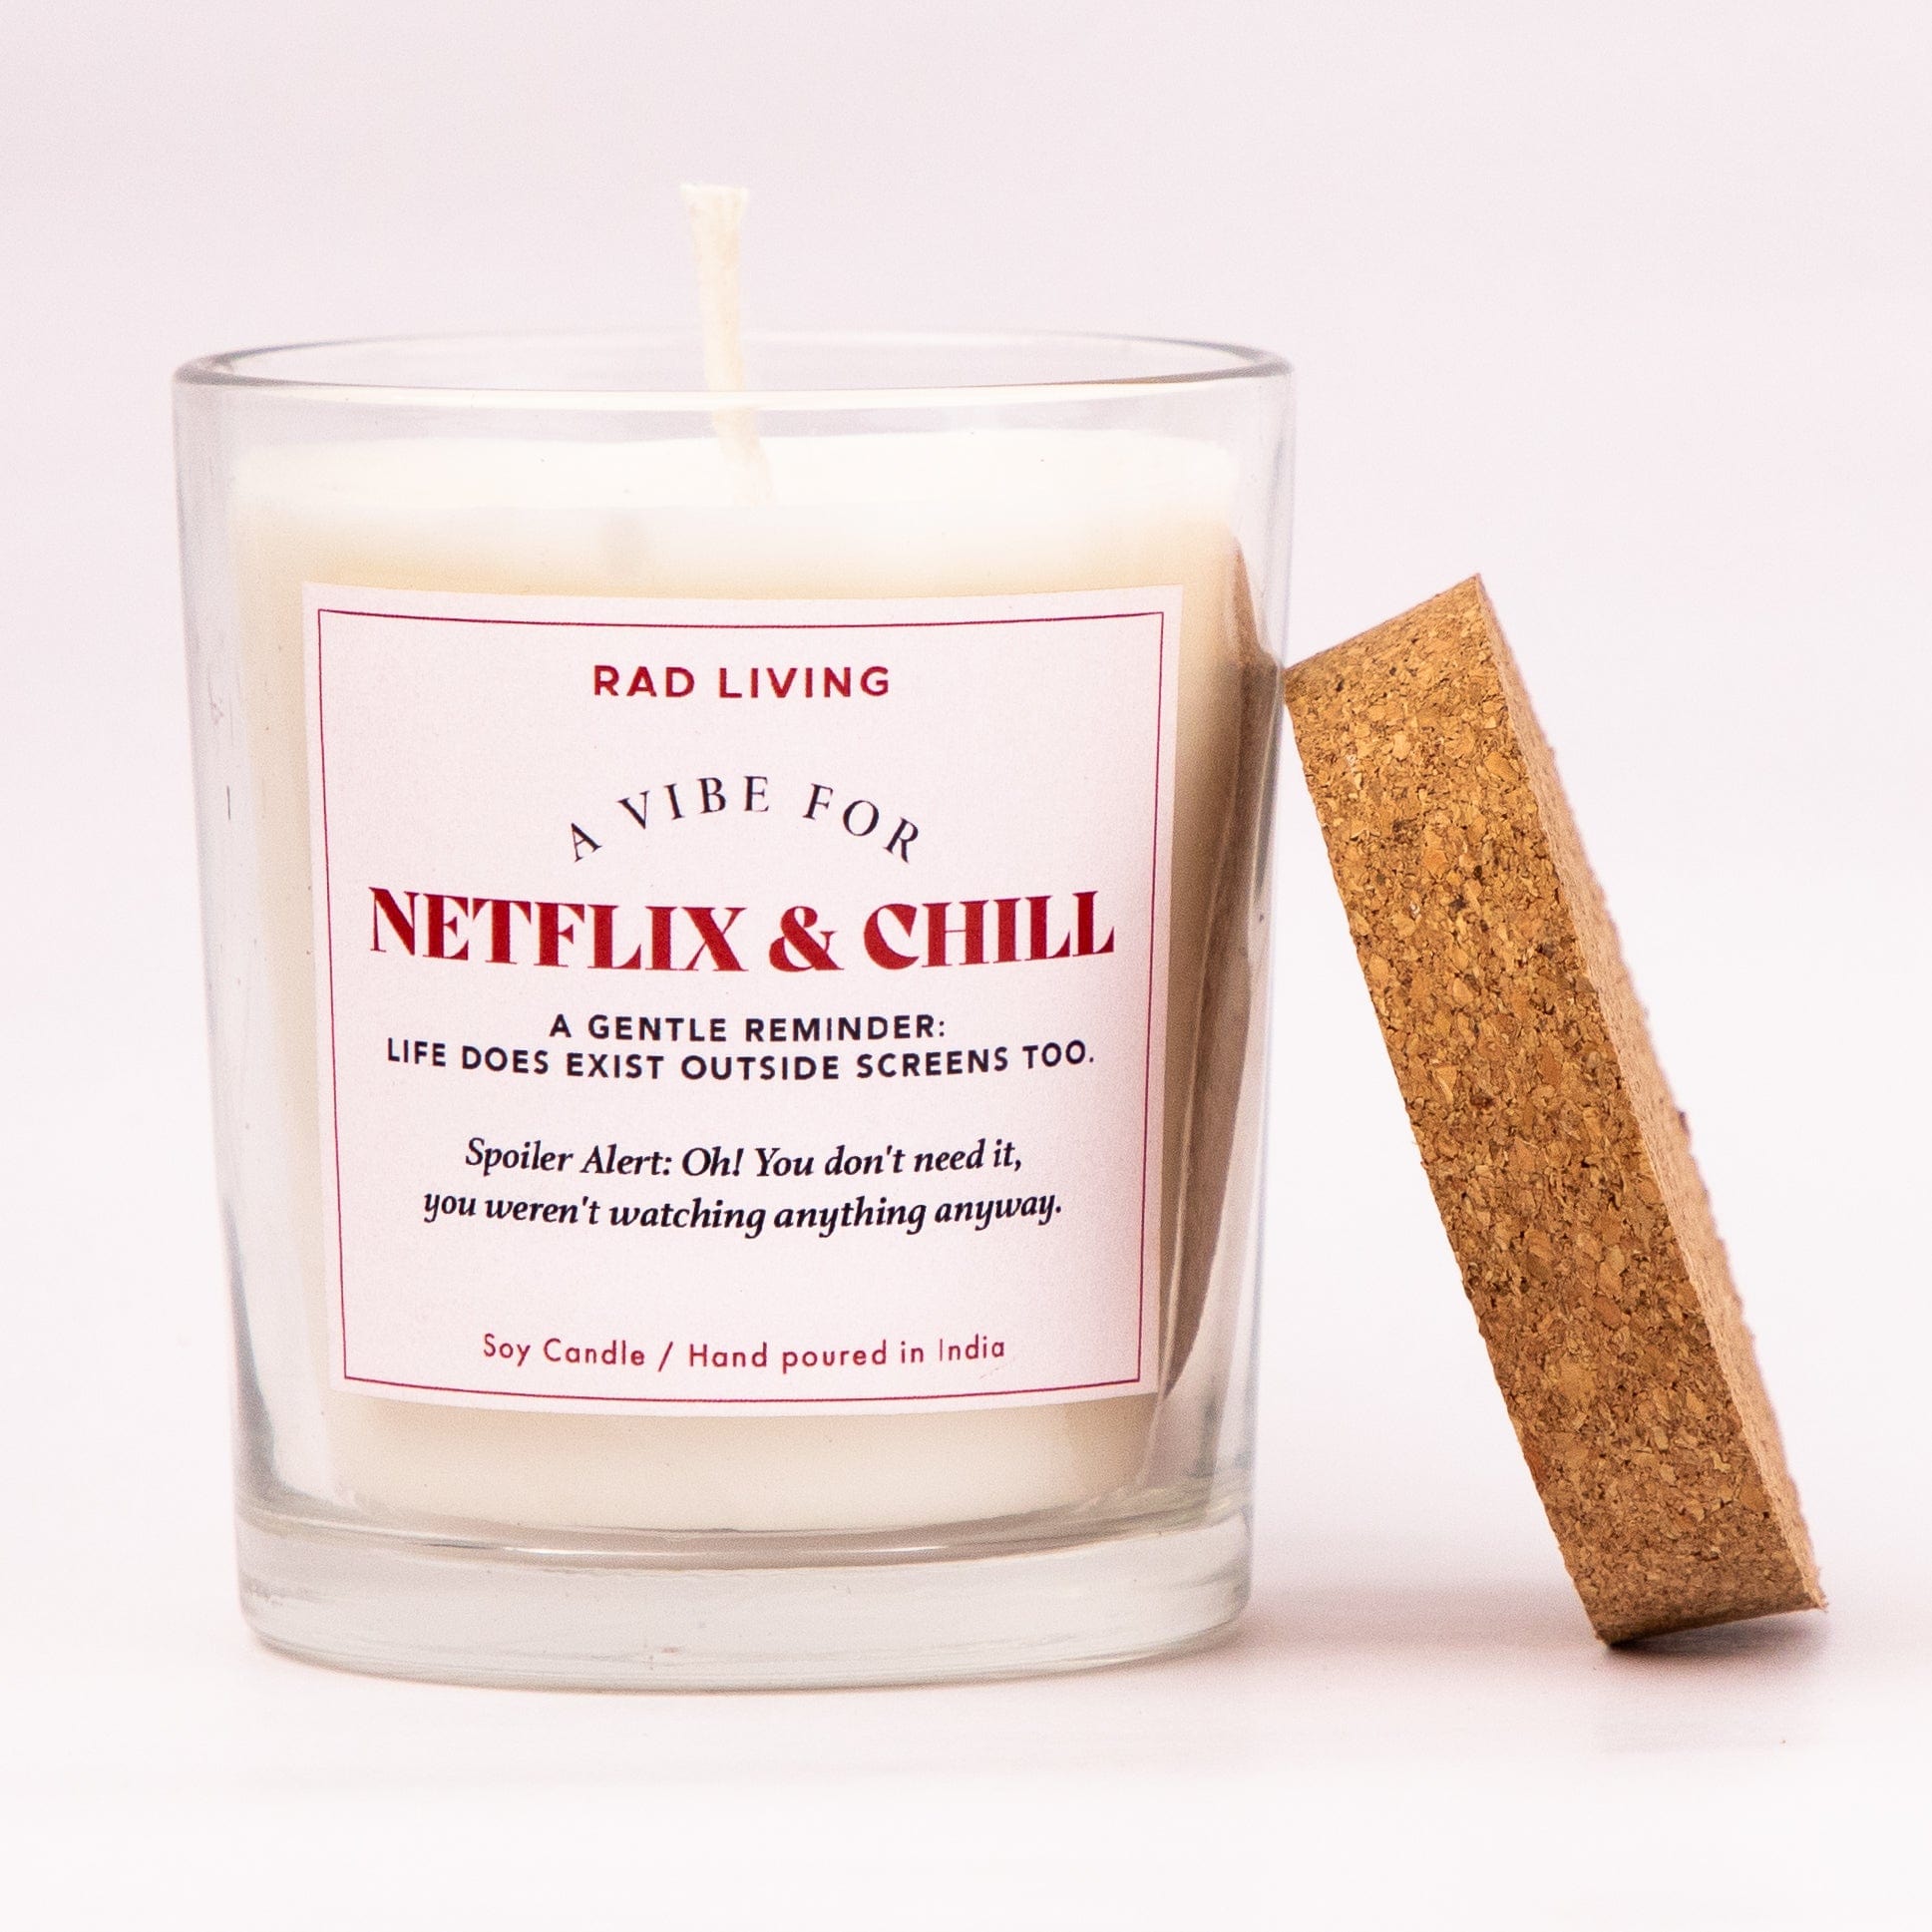 Netflix and Chill - Not So Vanilla Scented